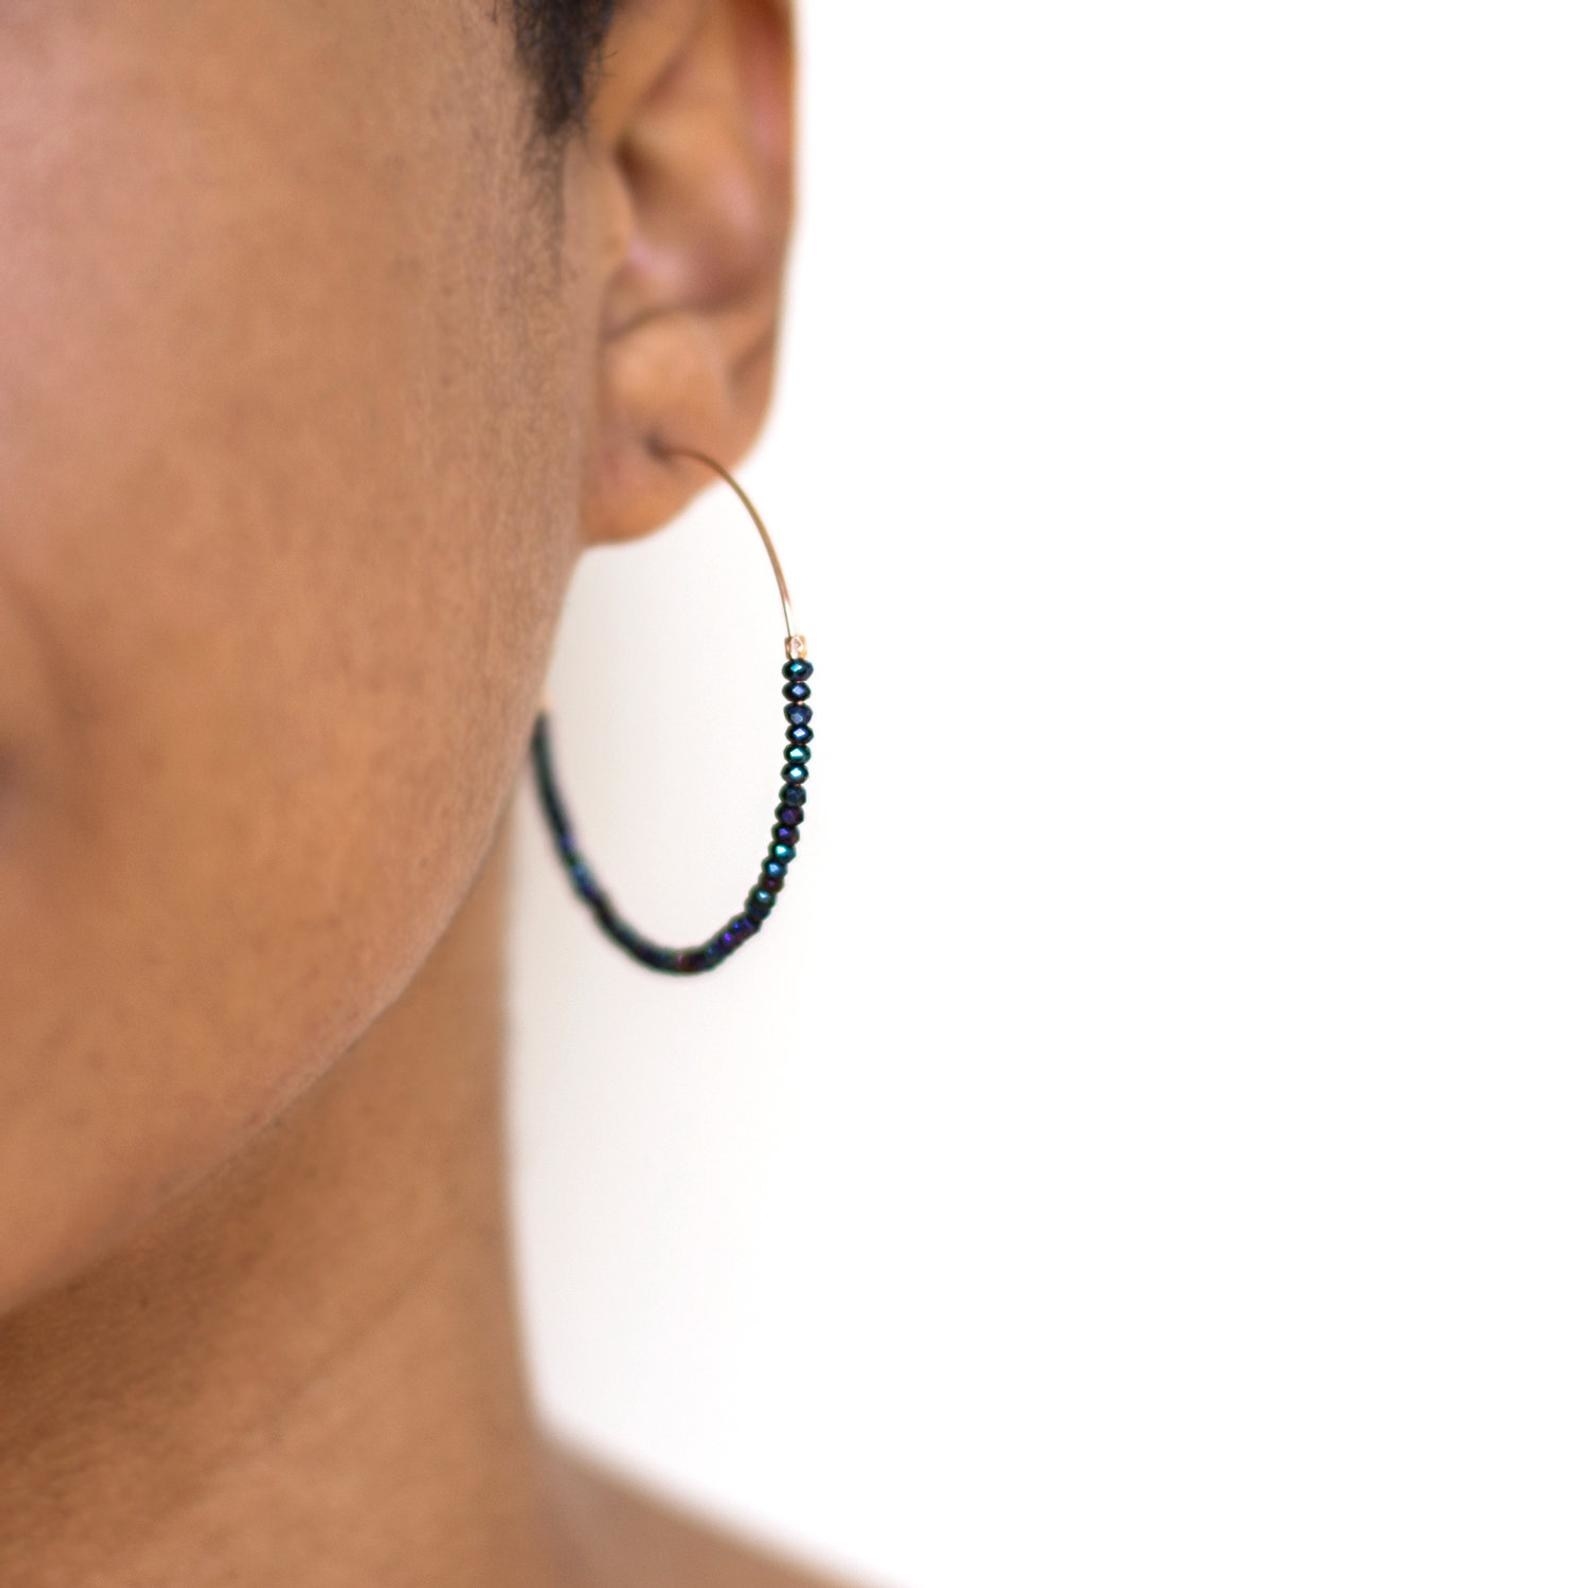 a model wearing thin hoop earrings with bead strung along them